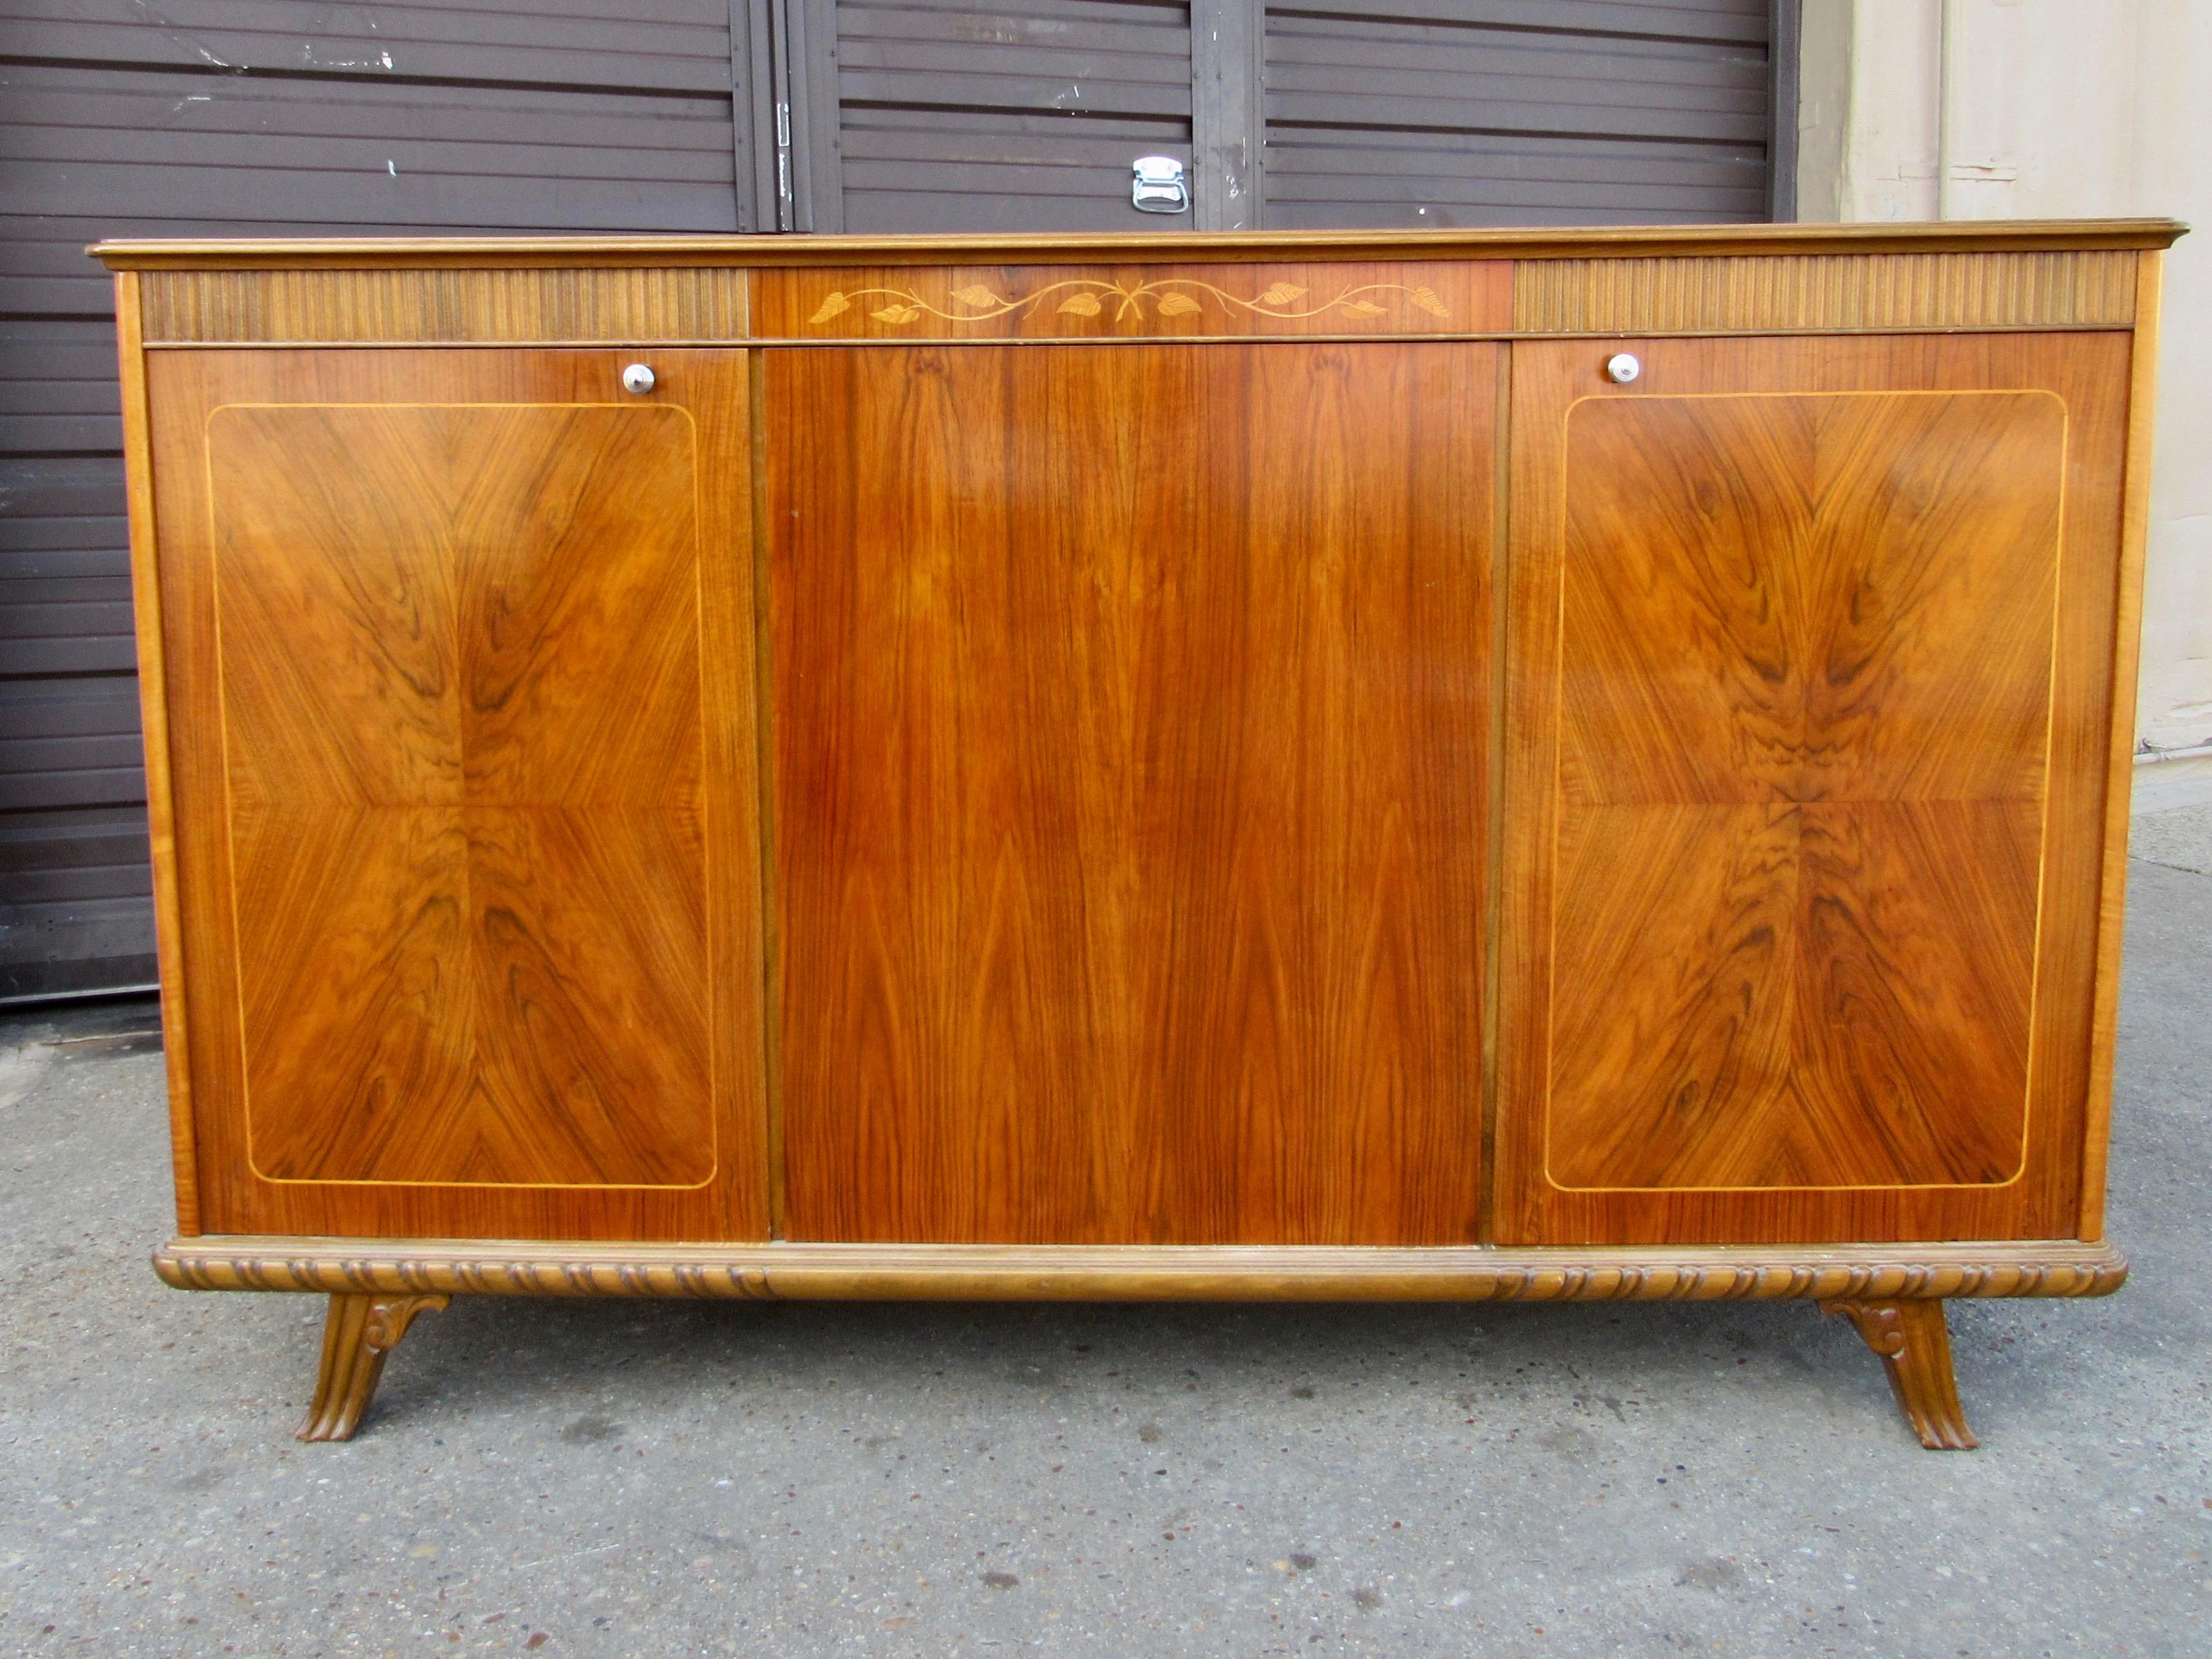 Carl Malmsten for Svenska Mobelfabriken cabinet/sideboard in walnut circa 1950.
With original shelves (see them sitting in bottom of photos inside cabinet) are removable and adjustable. The cabinet has been lightly restored and is in excellent